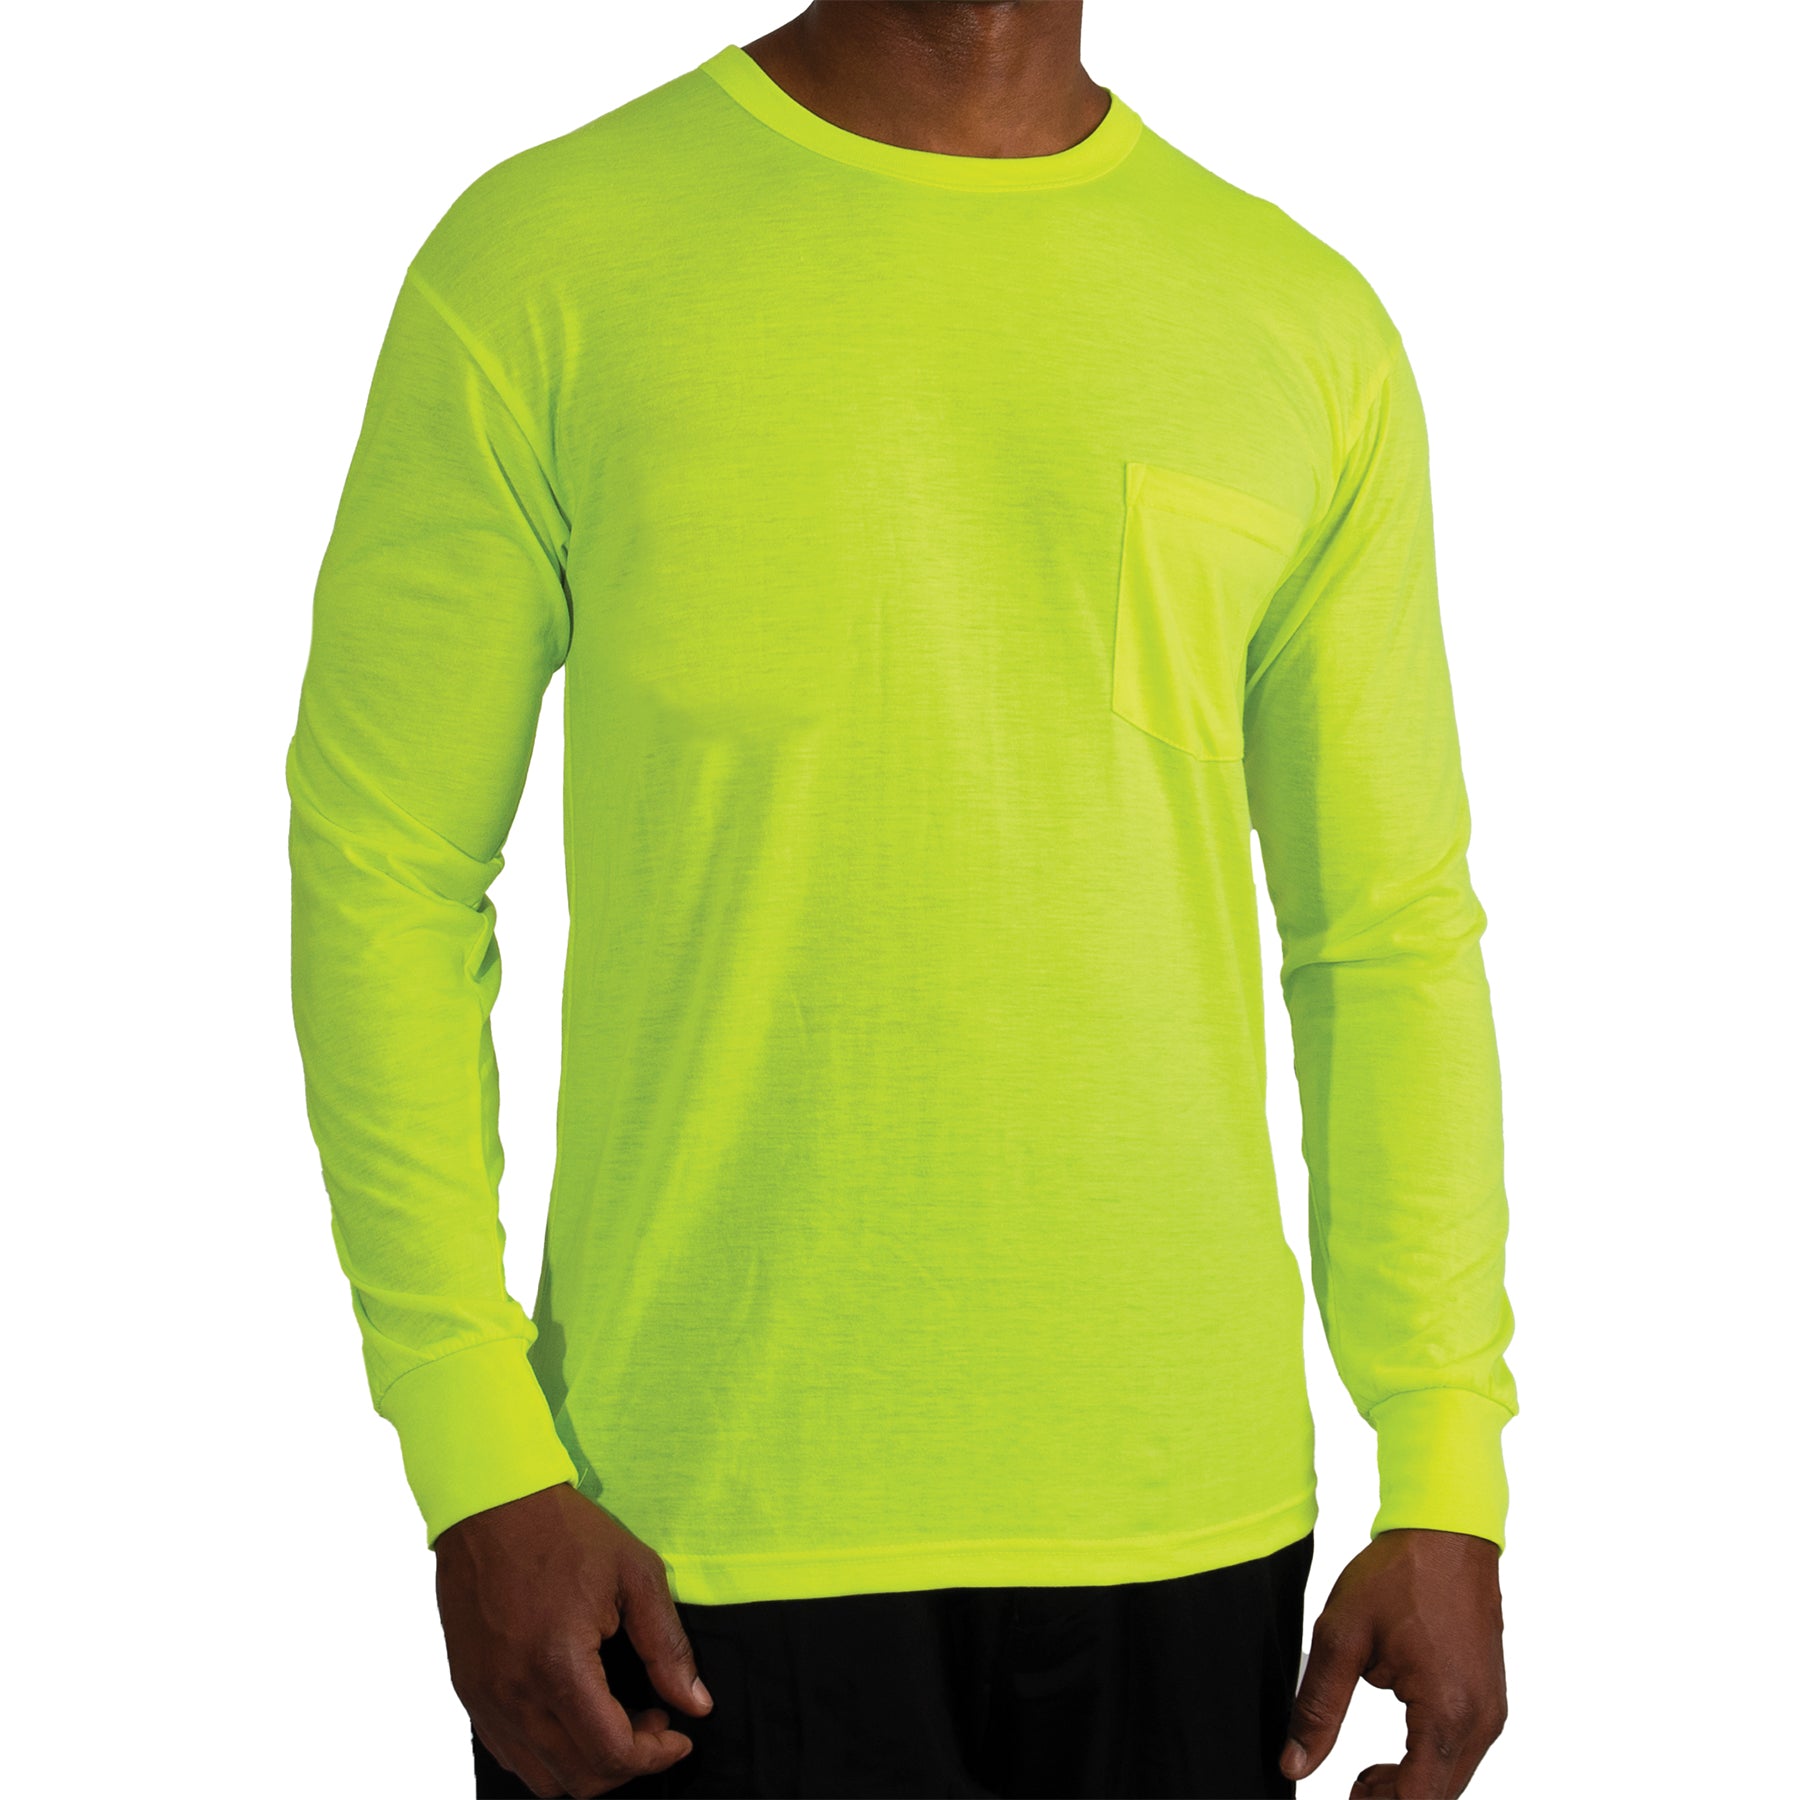 Rothco Moisture Wicking Long Sleeve Pocket T-Shirt - Safety Green - Tactical Choice Plus